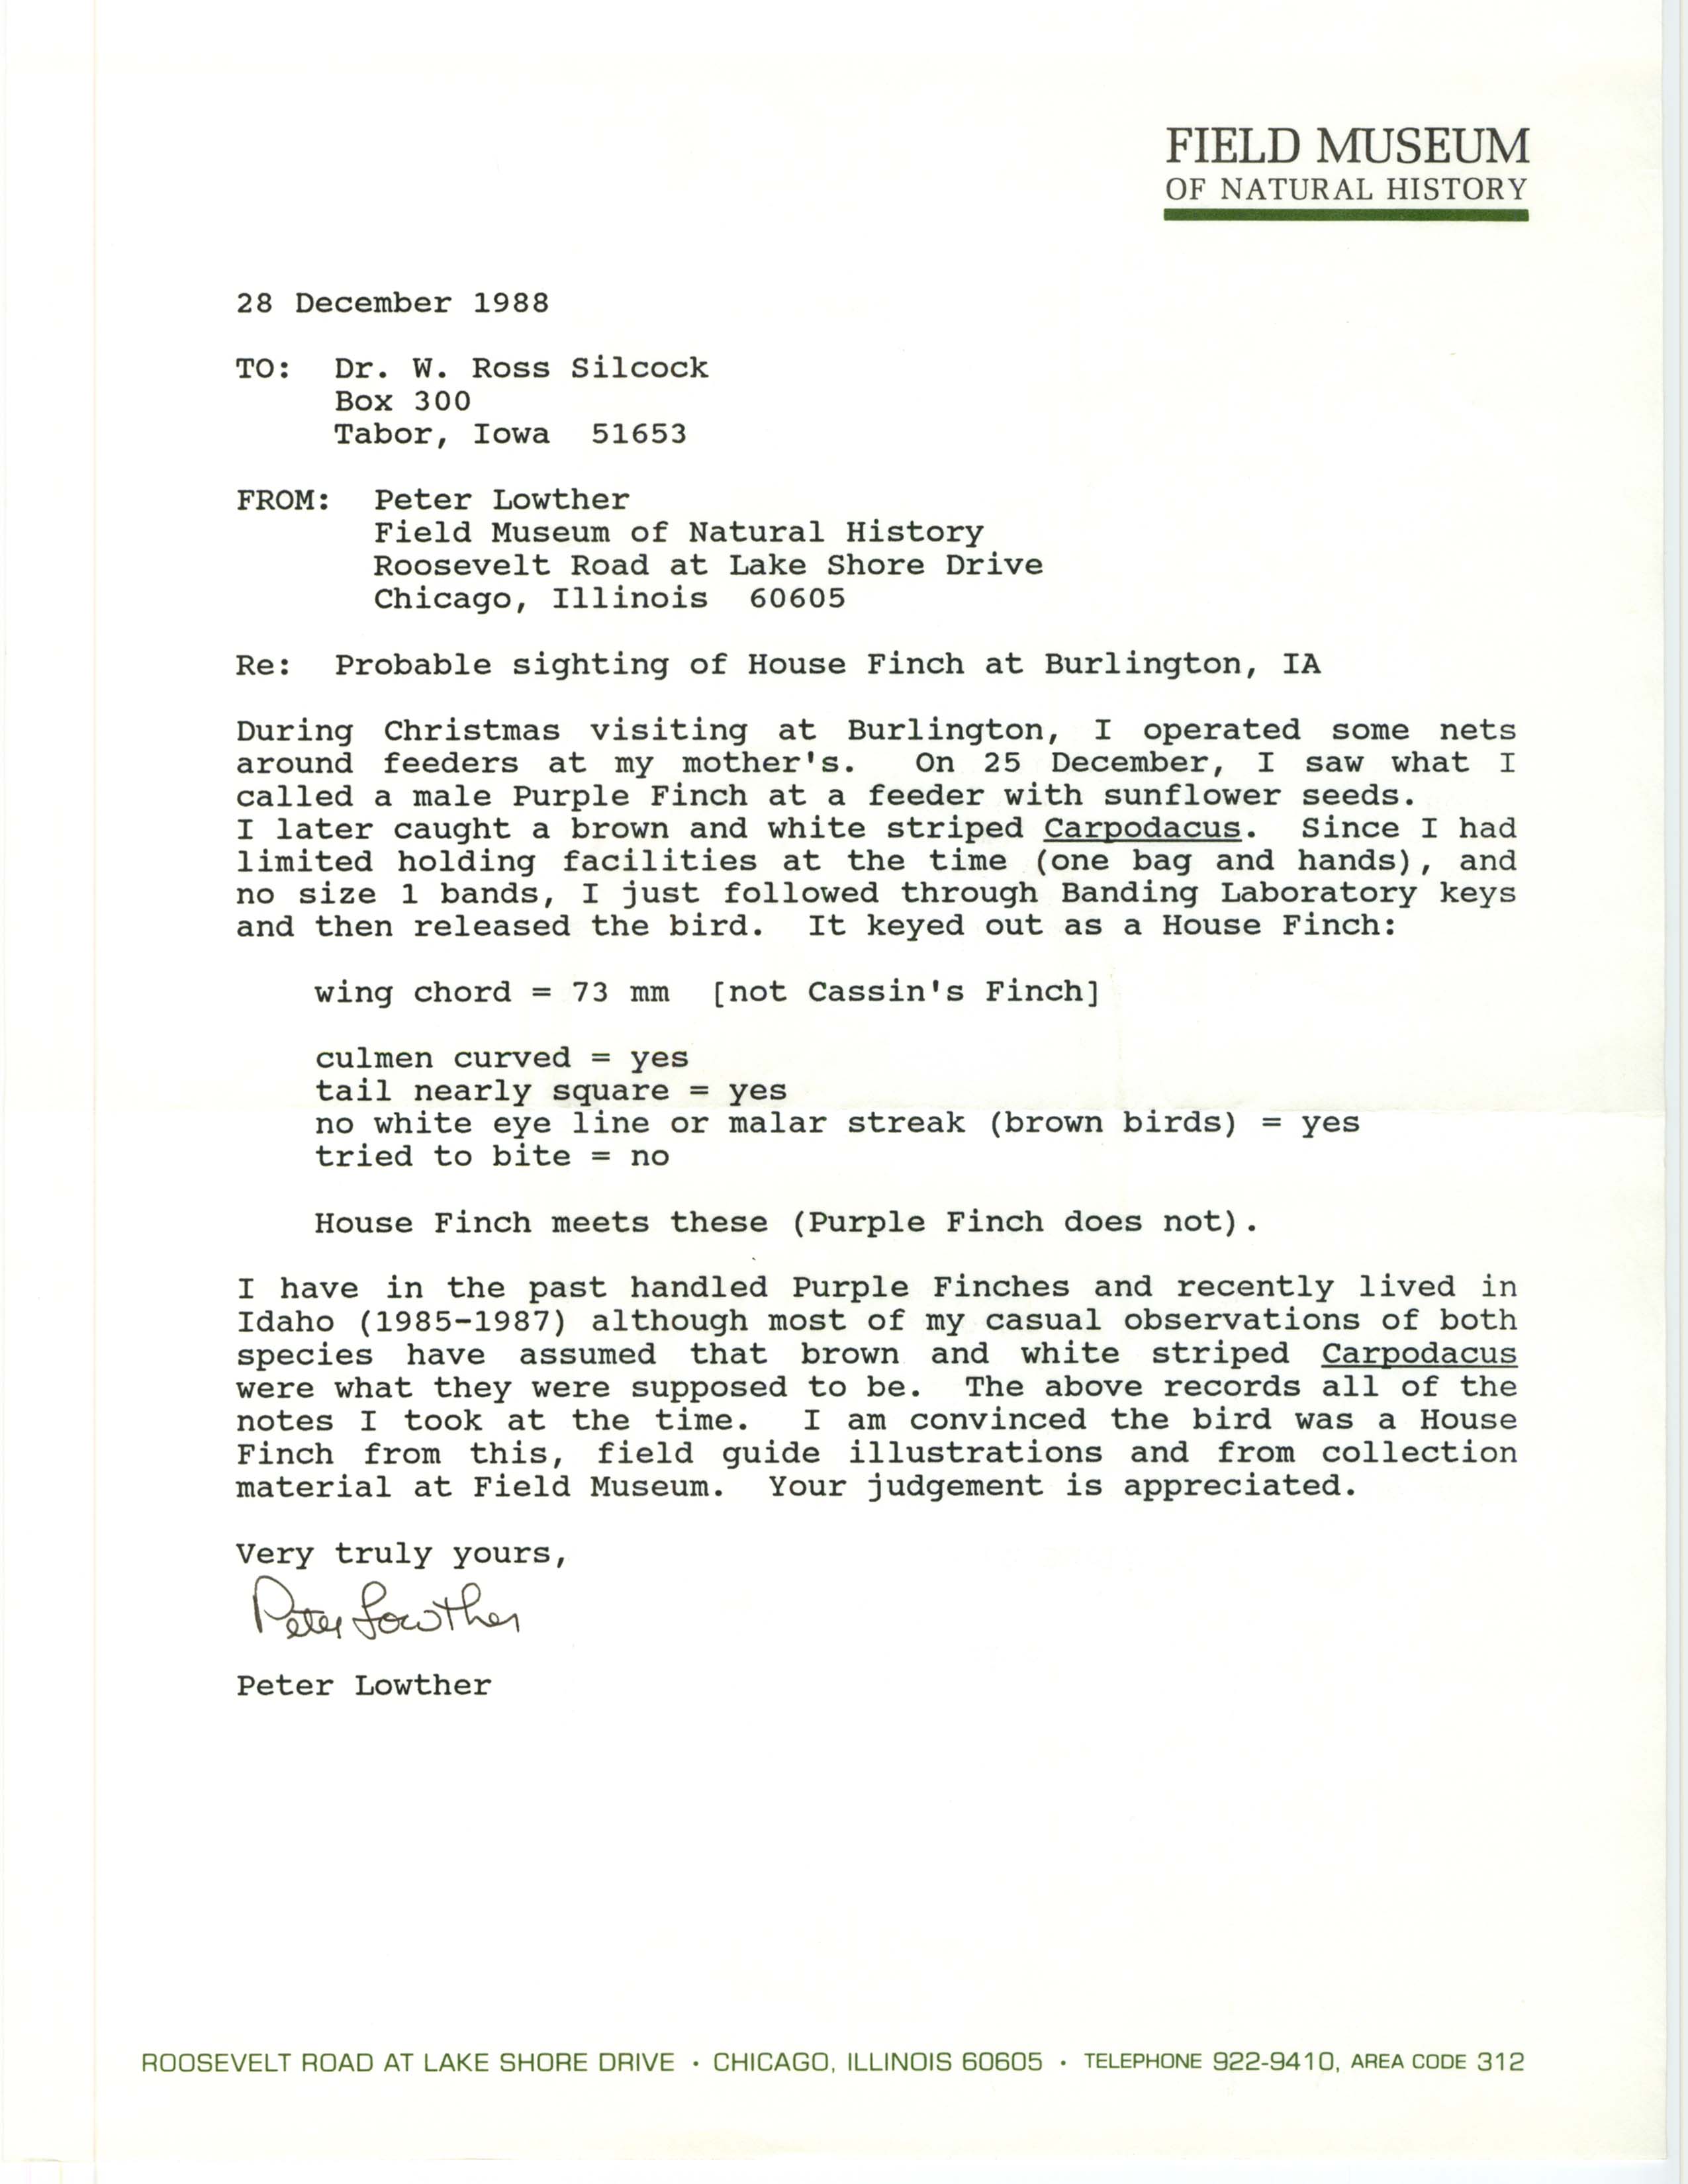 Peter Lowther letter to W. Ross Silcock regarding House Finch sighting in 1988, December 28, 1988 